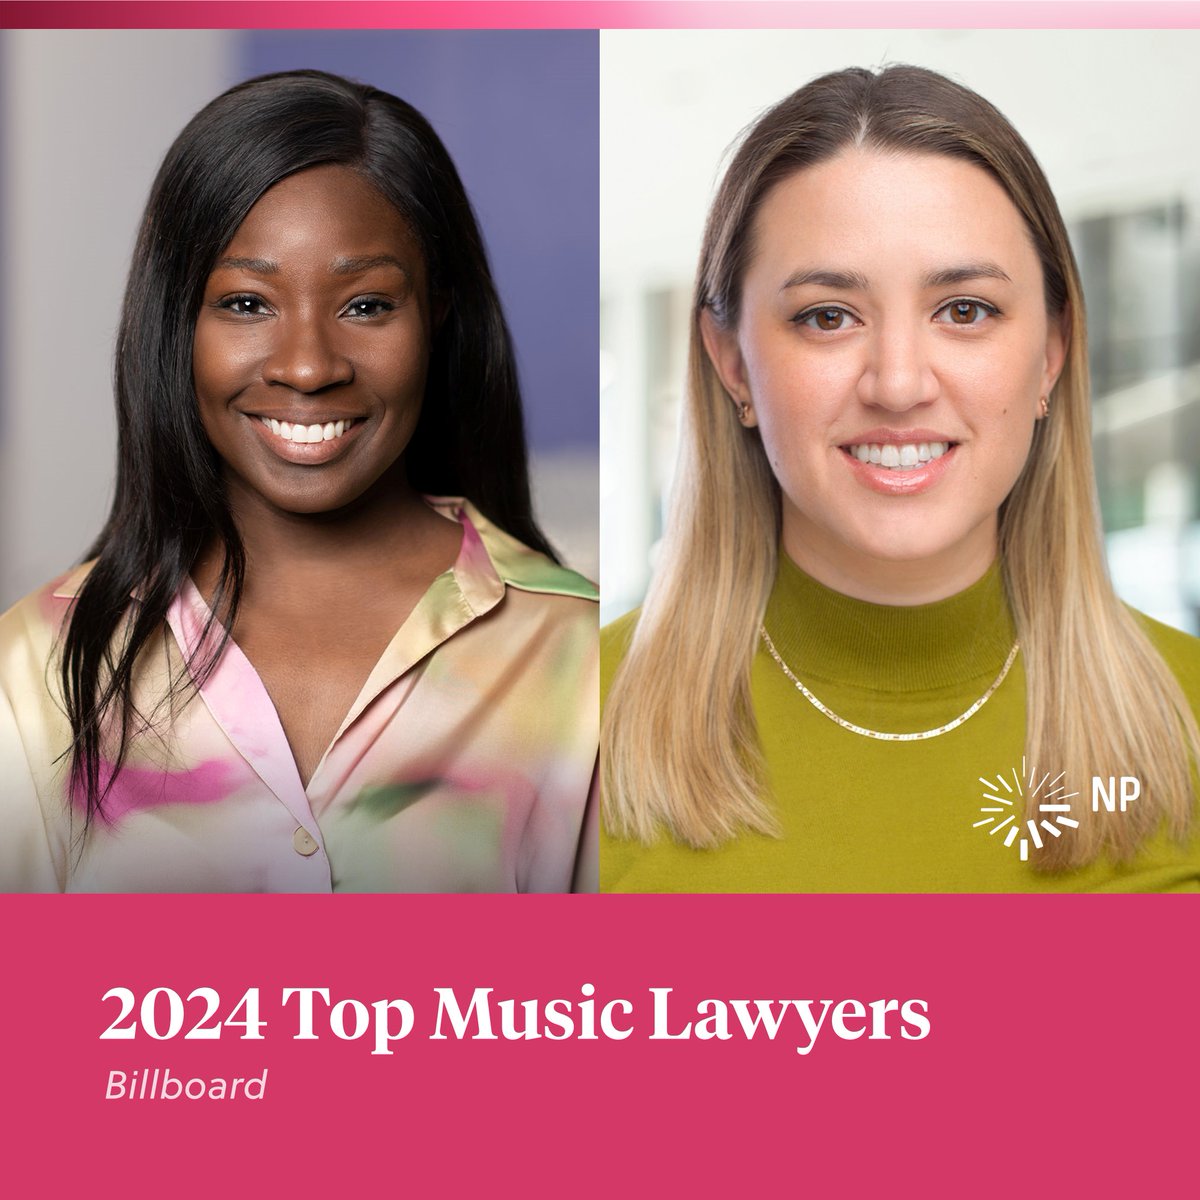 Congratulations to partners Carron Mitchell and Farrah Usmani for being named 'Top Music Lawyers' by @billboard! billboard.com/pro/billboard-…